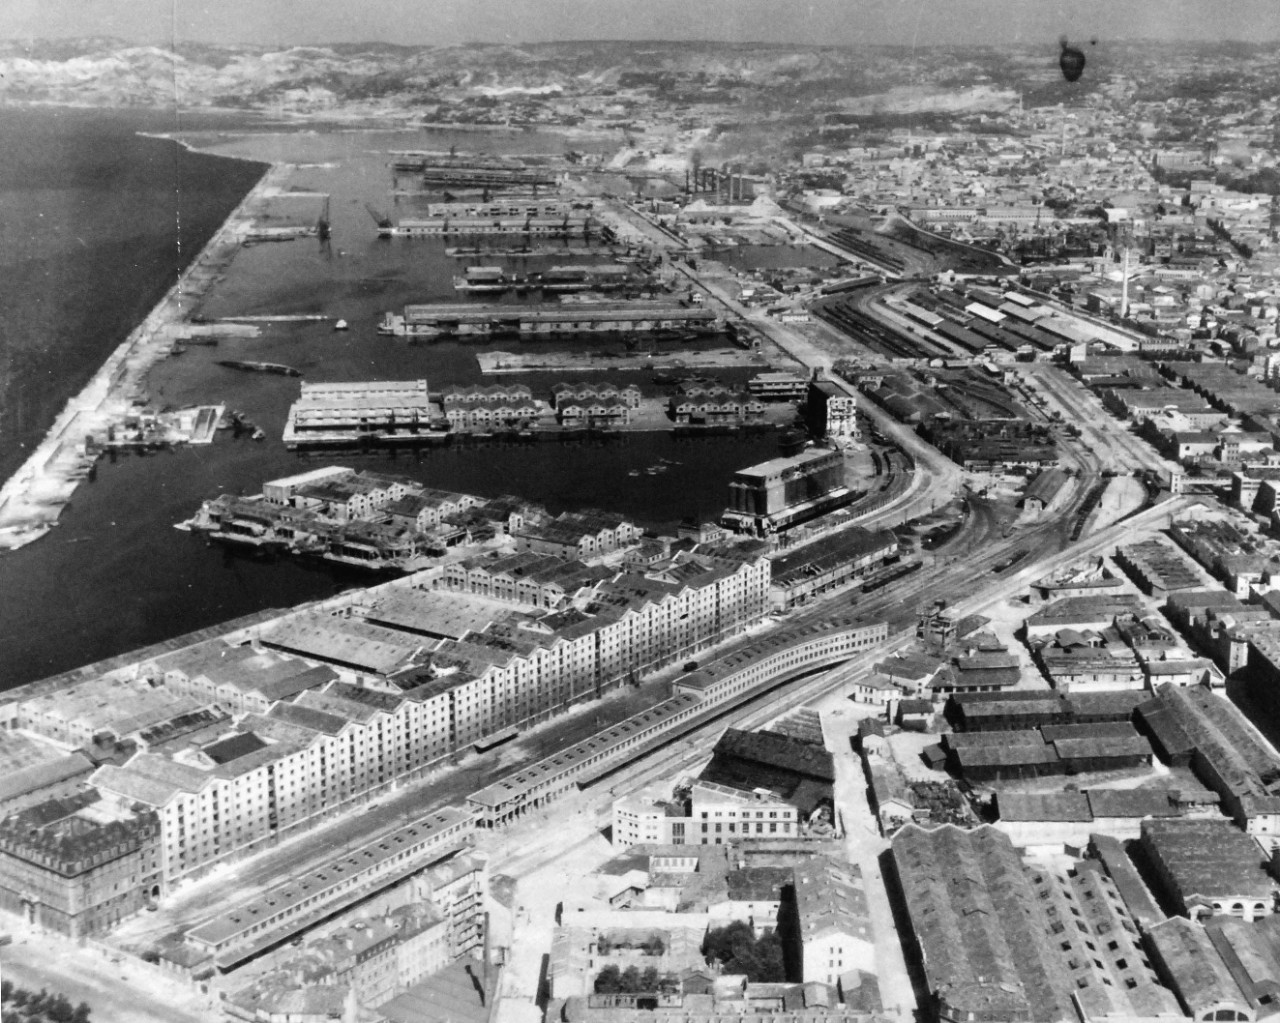 80-G-364052:  Invasion of Southern France, Marseille, August 1944.   Aerial view of the destruction to the harbor and installations at Marseille, France.  Taken by crew of USS Catoctin (AGC-5).  Photograph received on 2 April 1946.   Official U.S. Navy Photograph, now in the collections of the National Archives.  (2014/7/10).